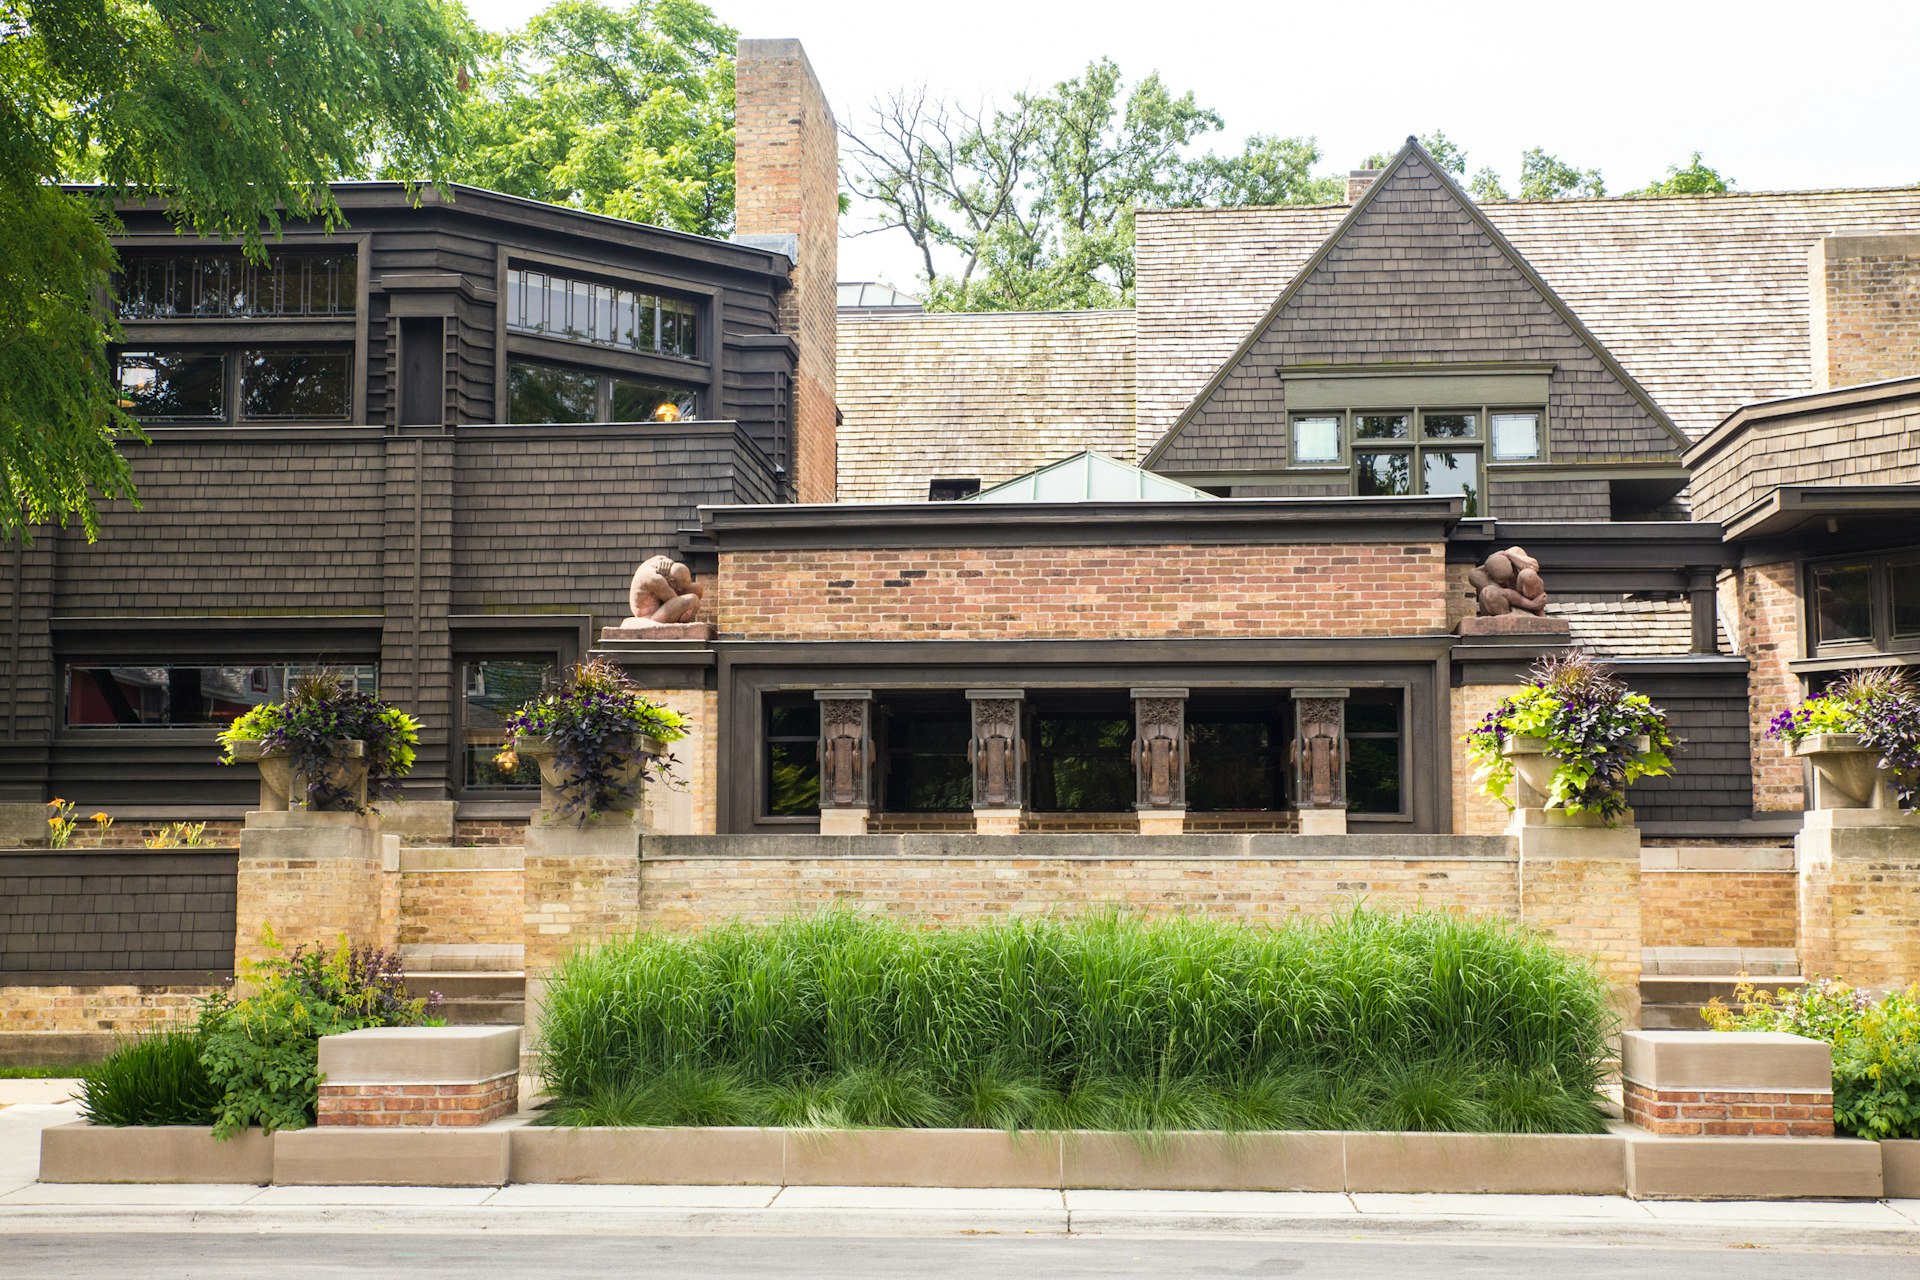 Exterior shot of the home and studio of American architect Frank Lloyd Wright in Oak Park, Illinois.